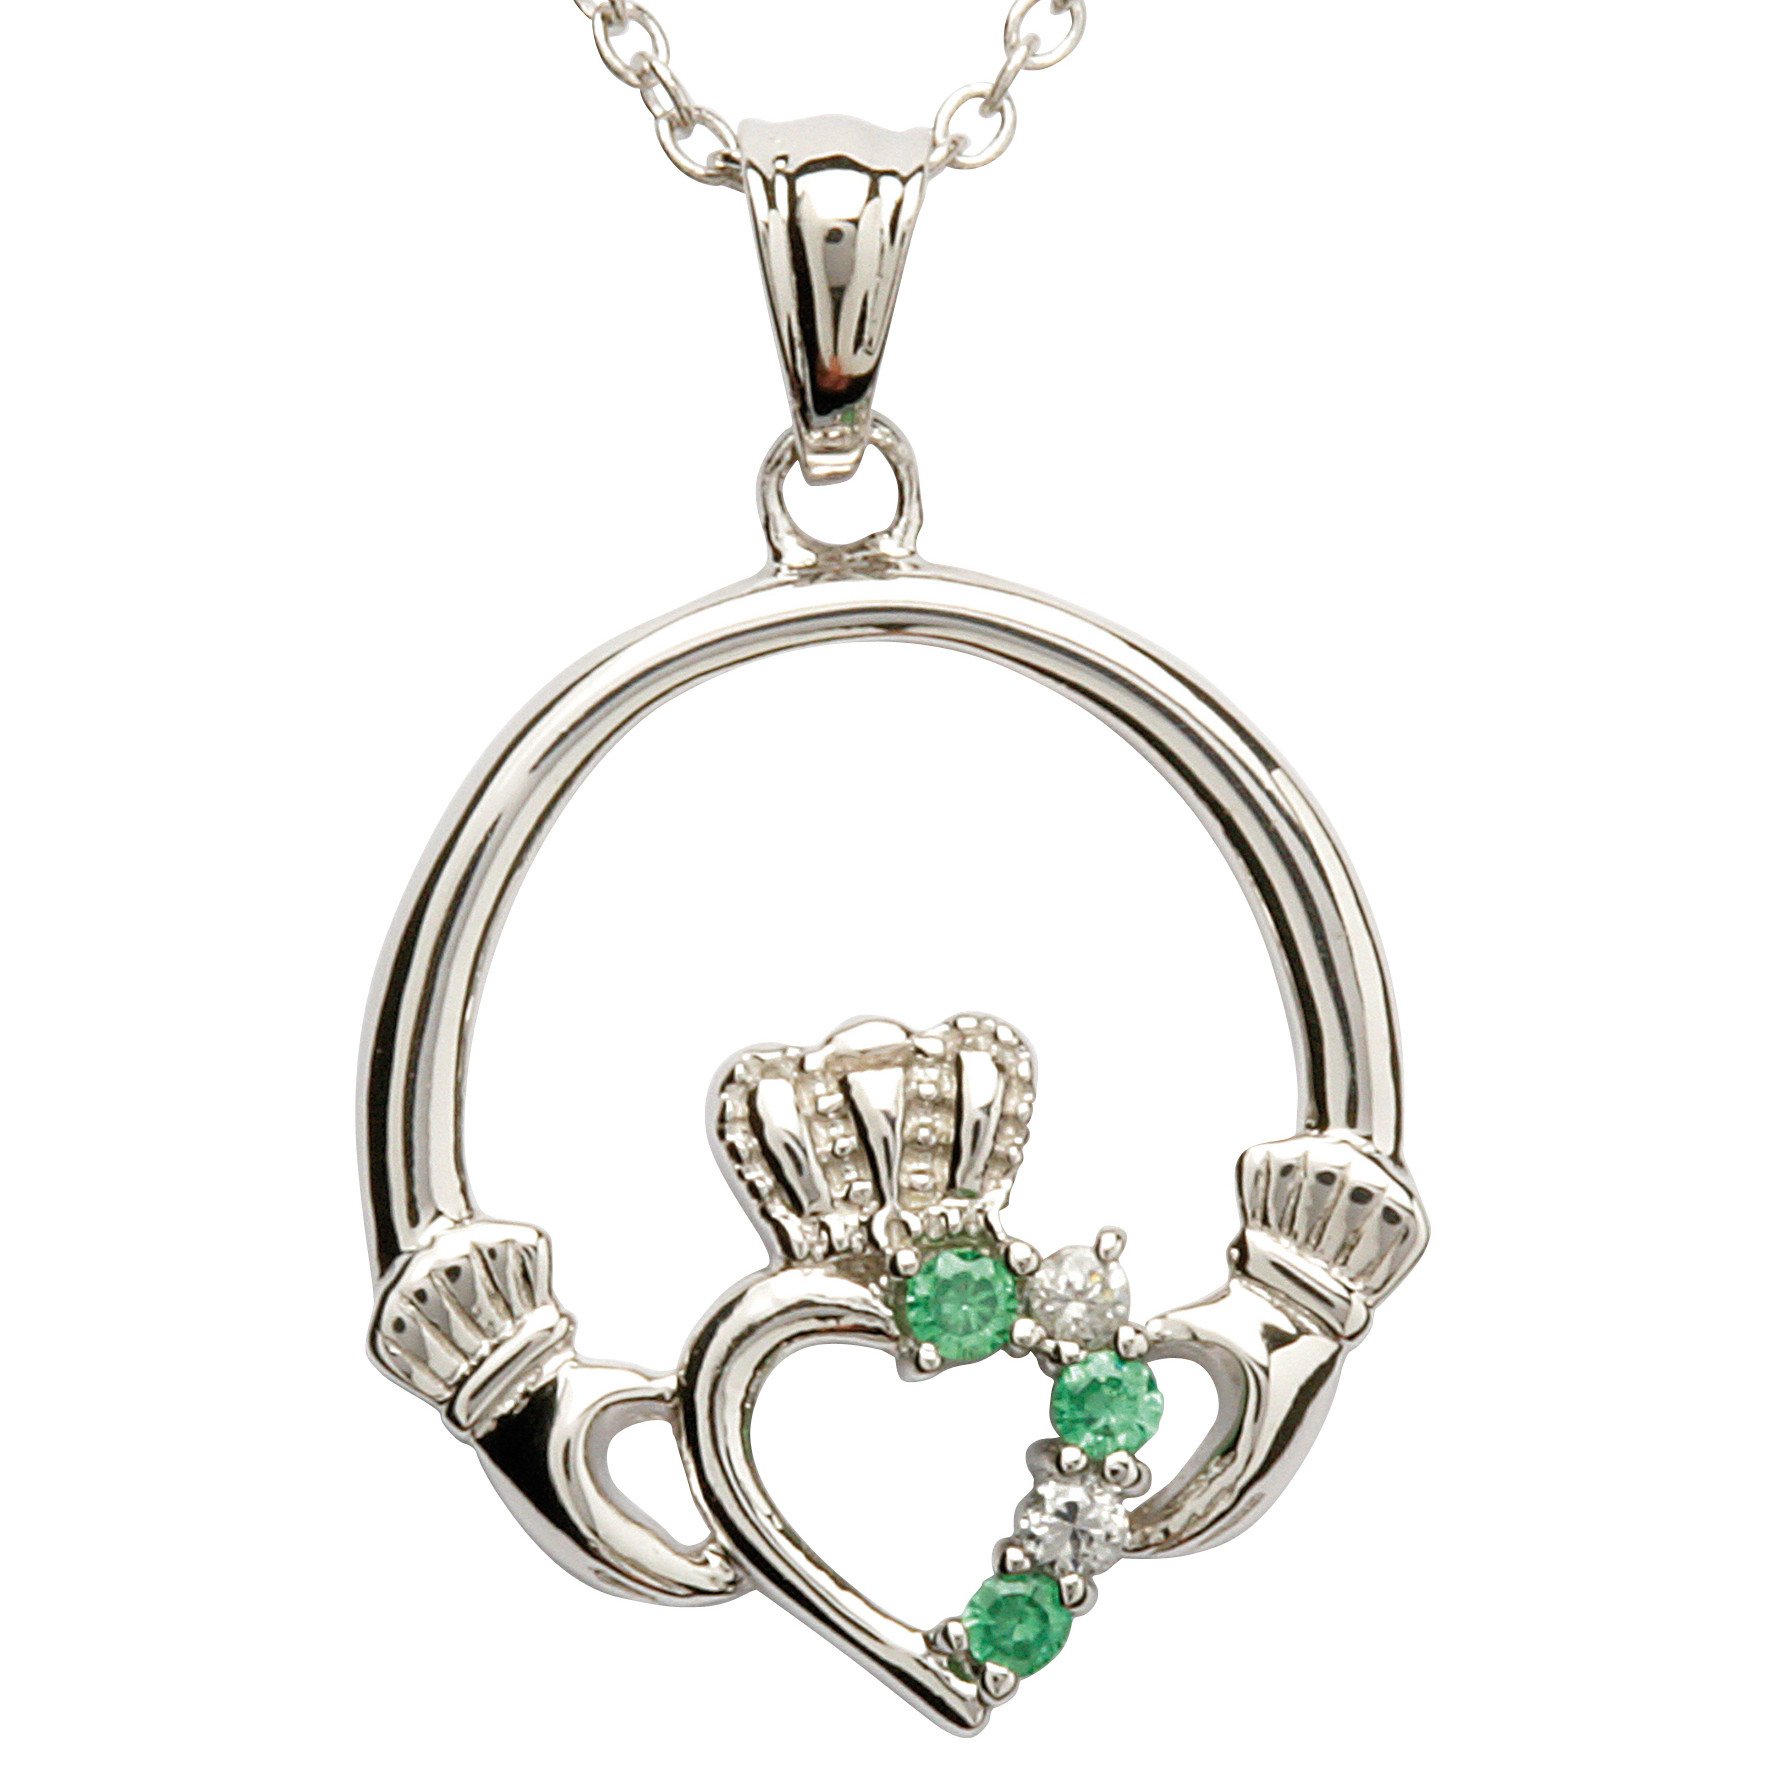 Product image for Claddagh Pendant - Sterling Silver Claddagh Stone Set Claddagh Pendant with Chain